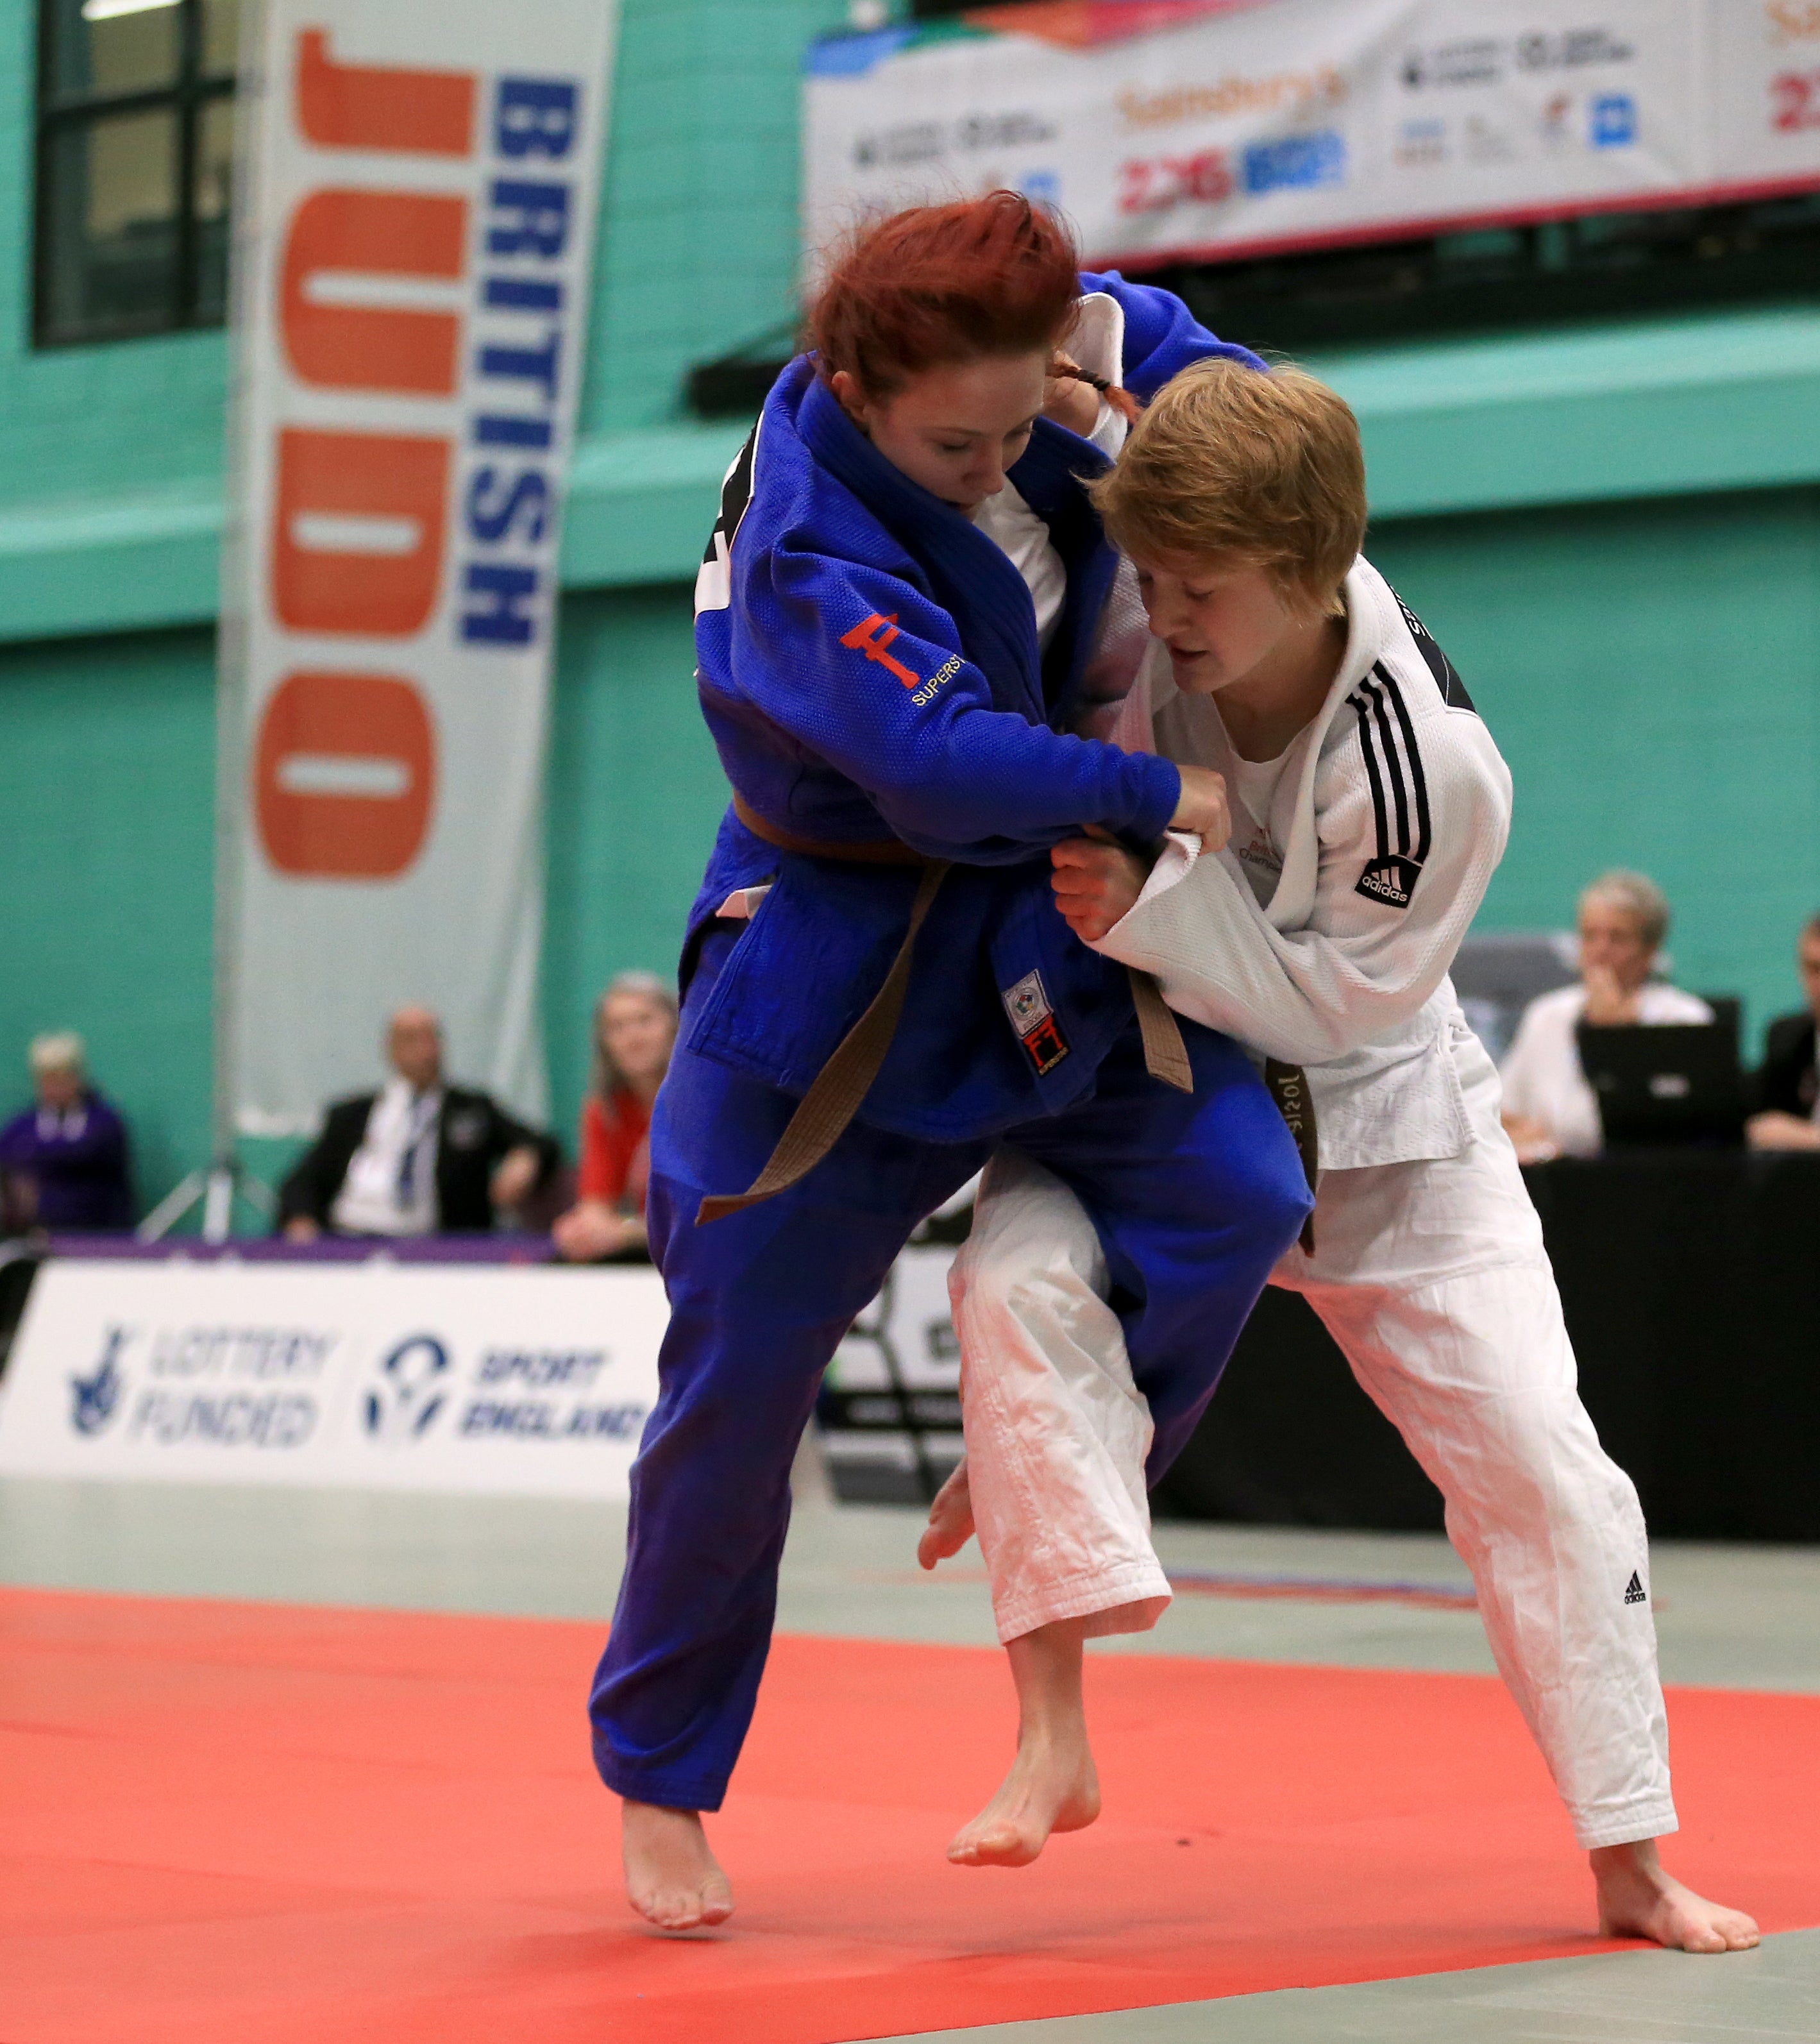 Jasmine Hacker-Jones (left) has been selected for Wales’ judo team at the 2022 Commonwealth Games in Birmingham (Nigel French/PA)